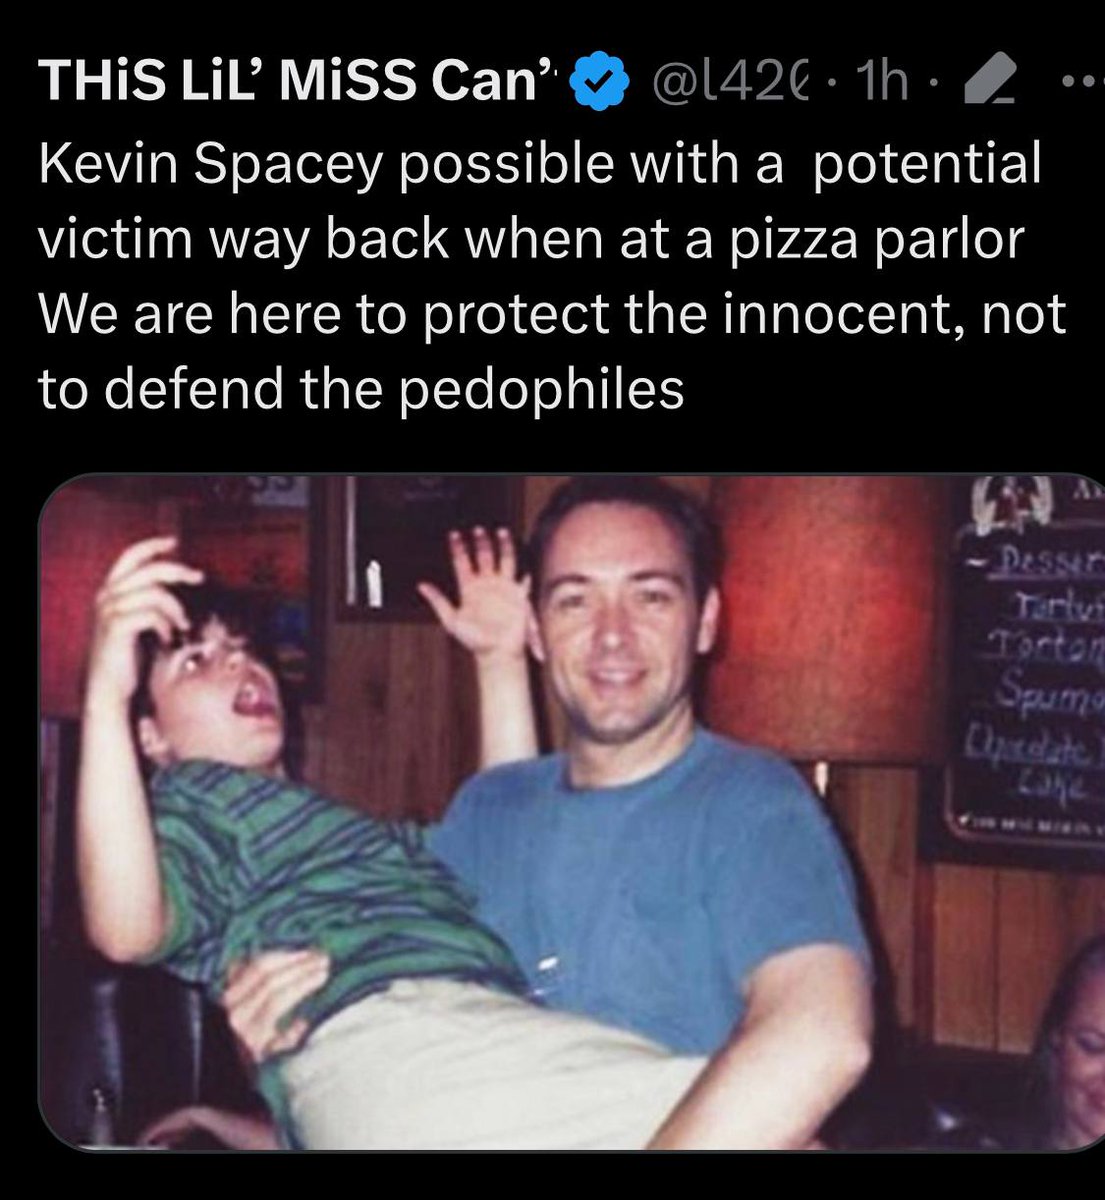 DEAD SATANIC PEDO. SO EVIL HE WAS RESTRICTED FROM RETURNING TO EPSTEIN ISLAND.